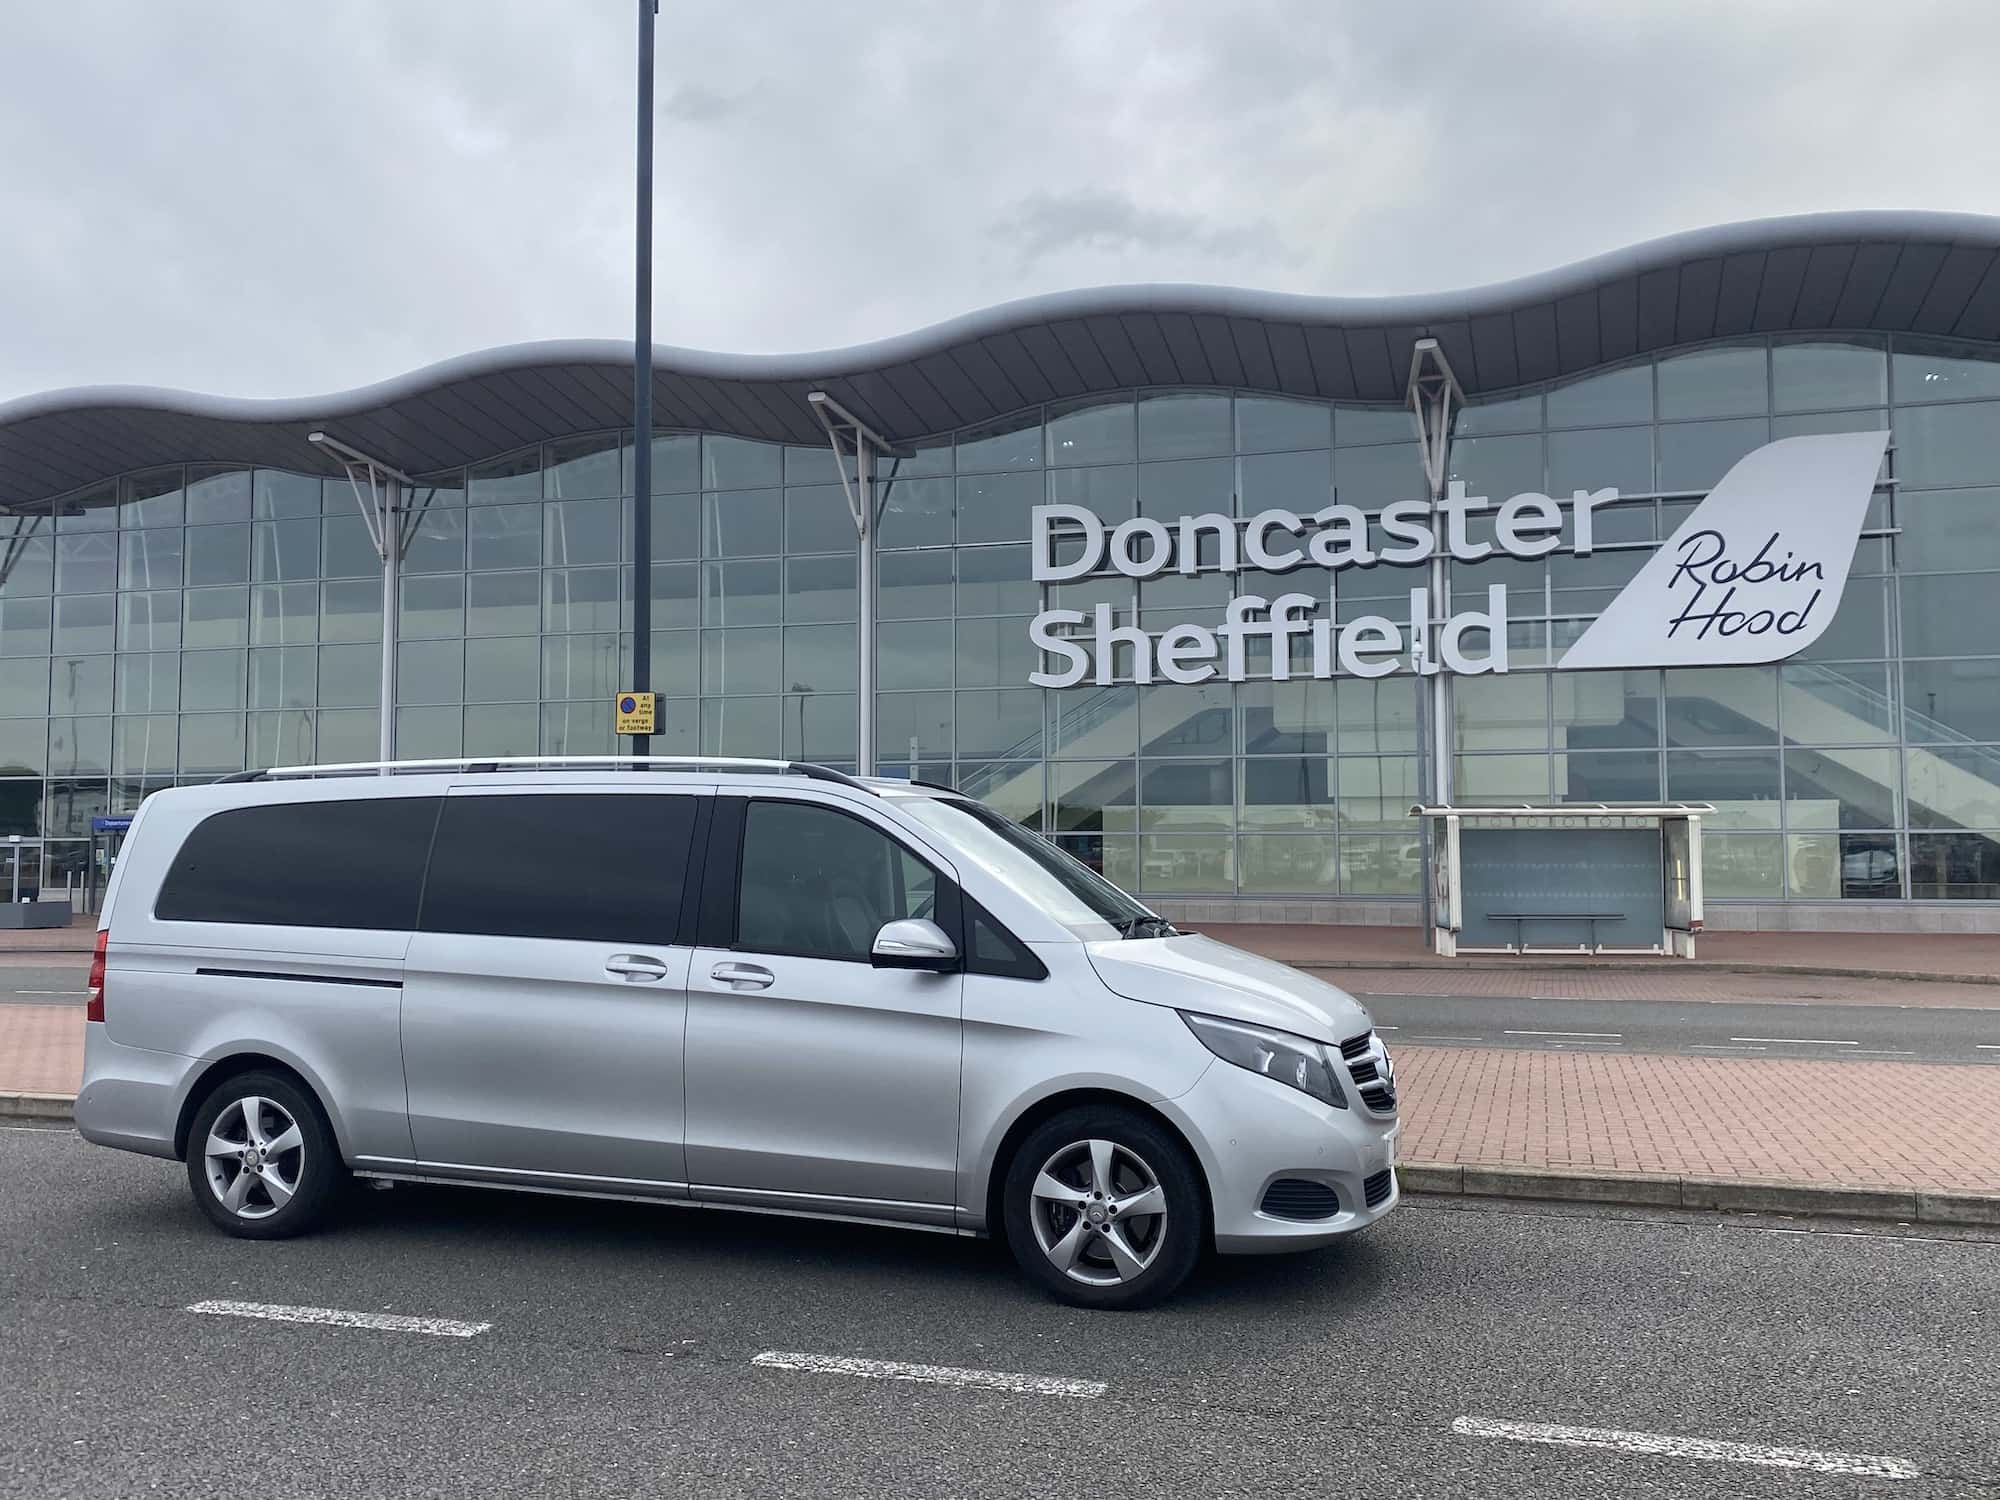 Mercedes V Class dropping airport transfer clients from Derby to Doncaster Airport